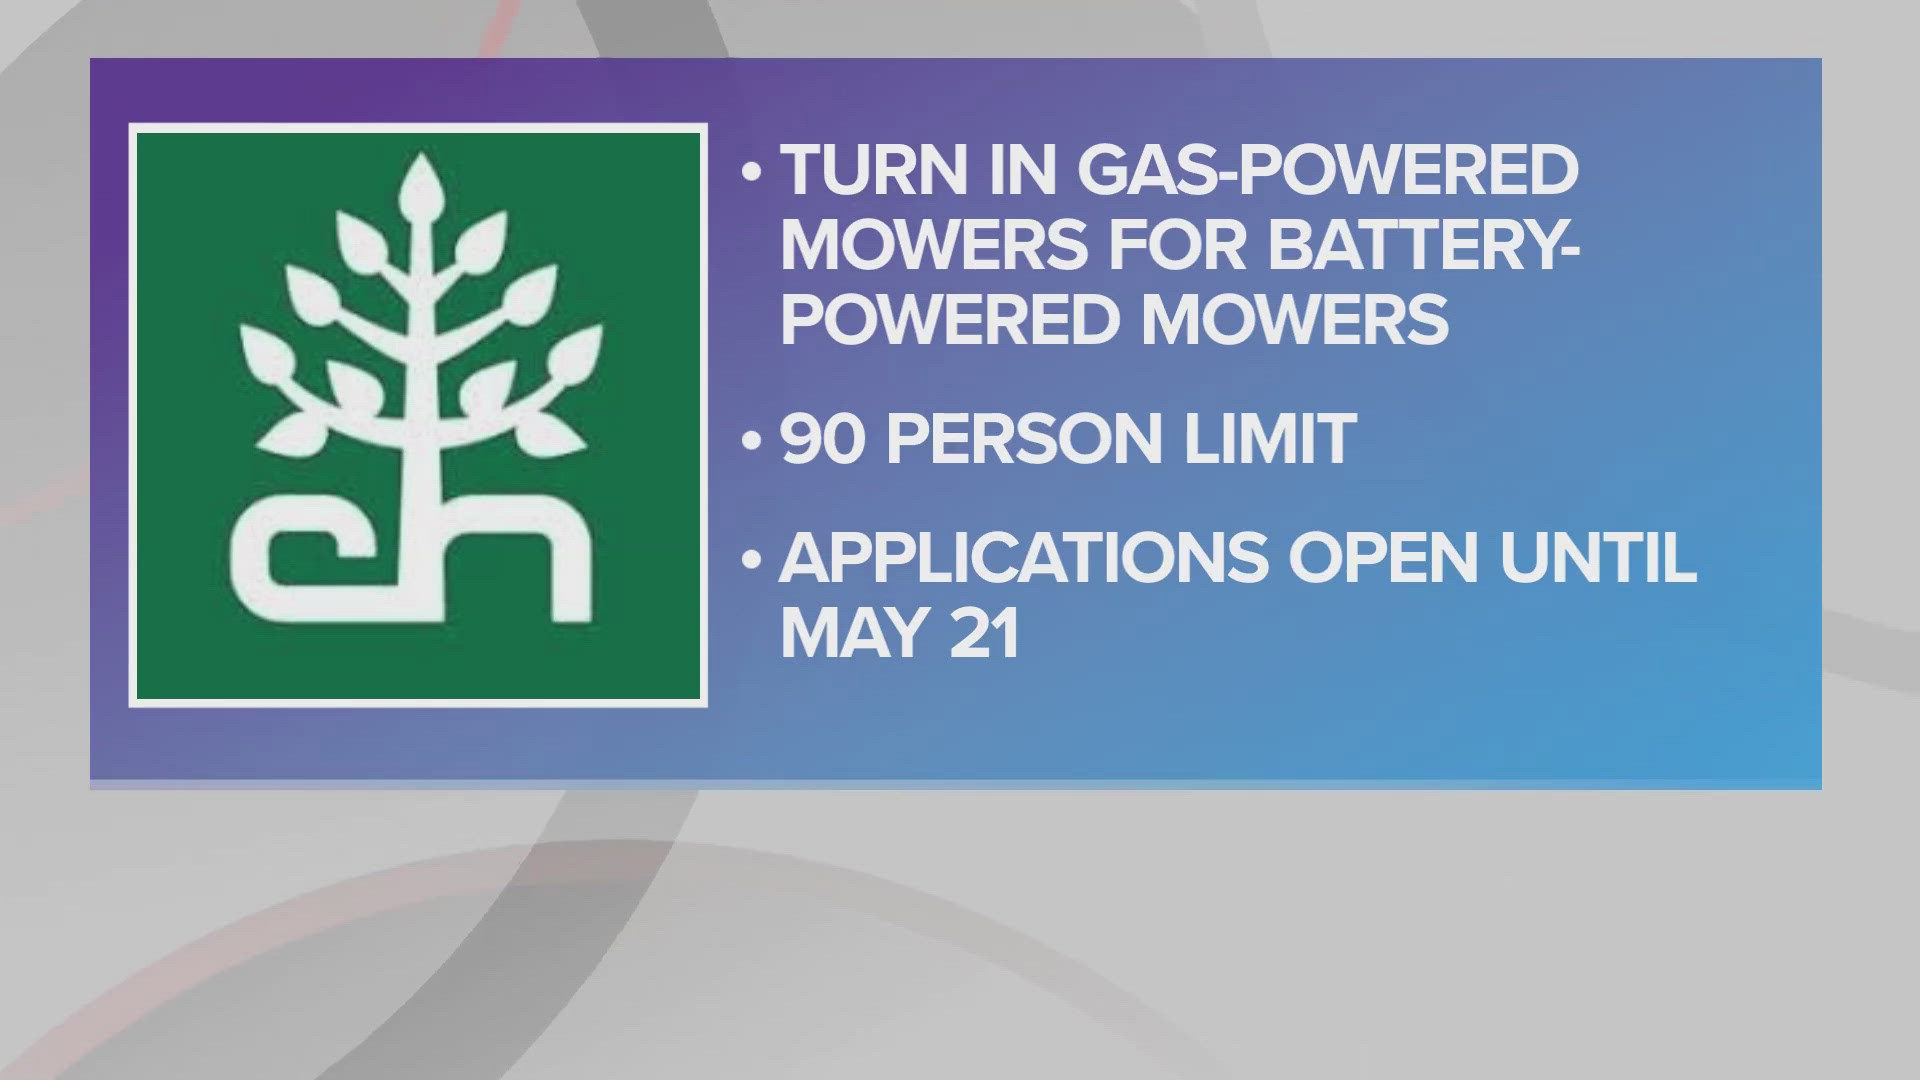 Cleveland Heights Mayor Kahlil Seren announced 90 residents will be selected to turn in their gas-powered lawnmowers in exchange for battery-powered ones.